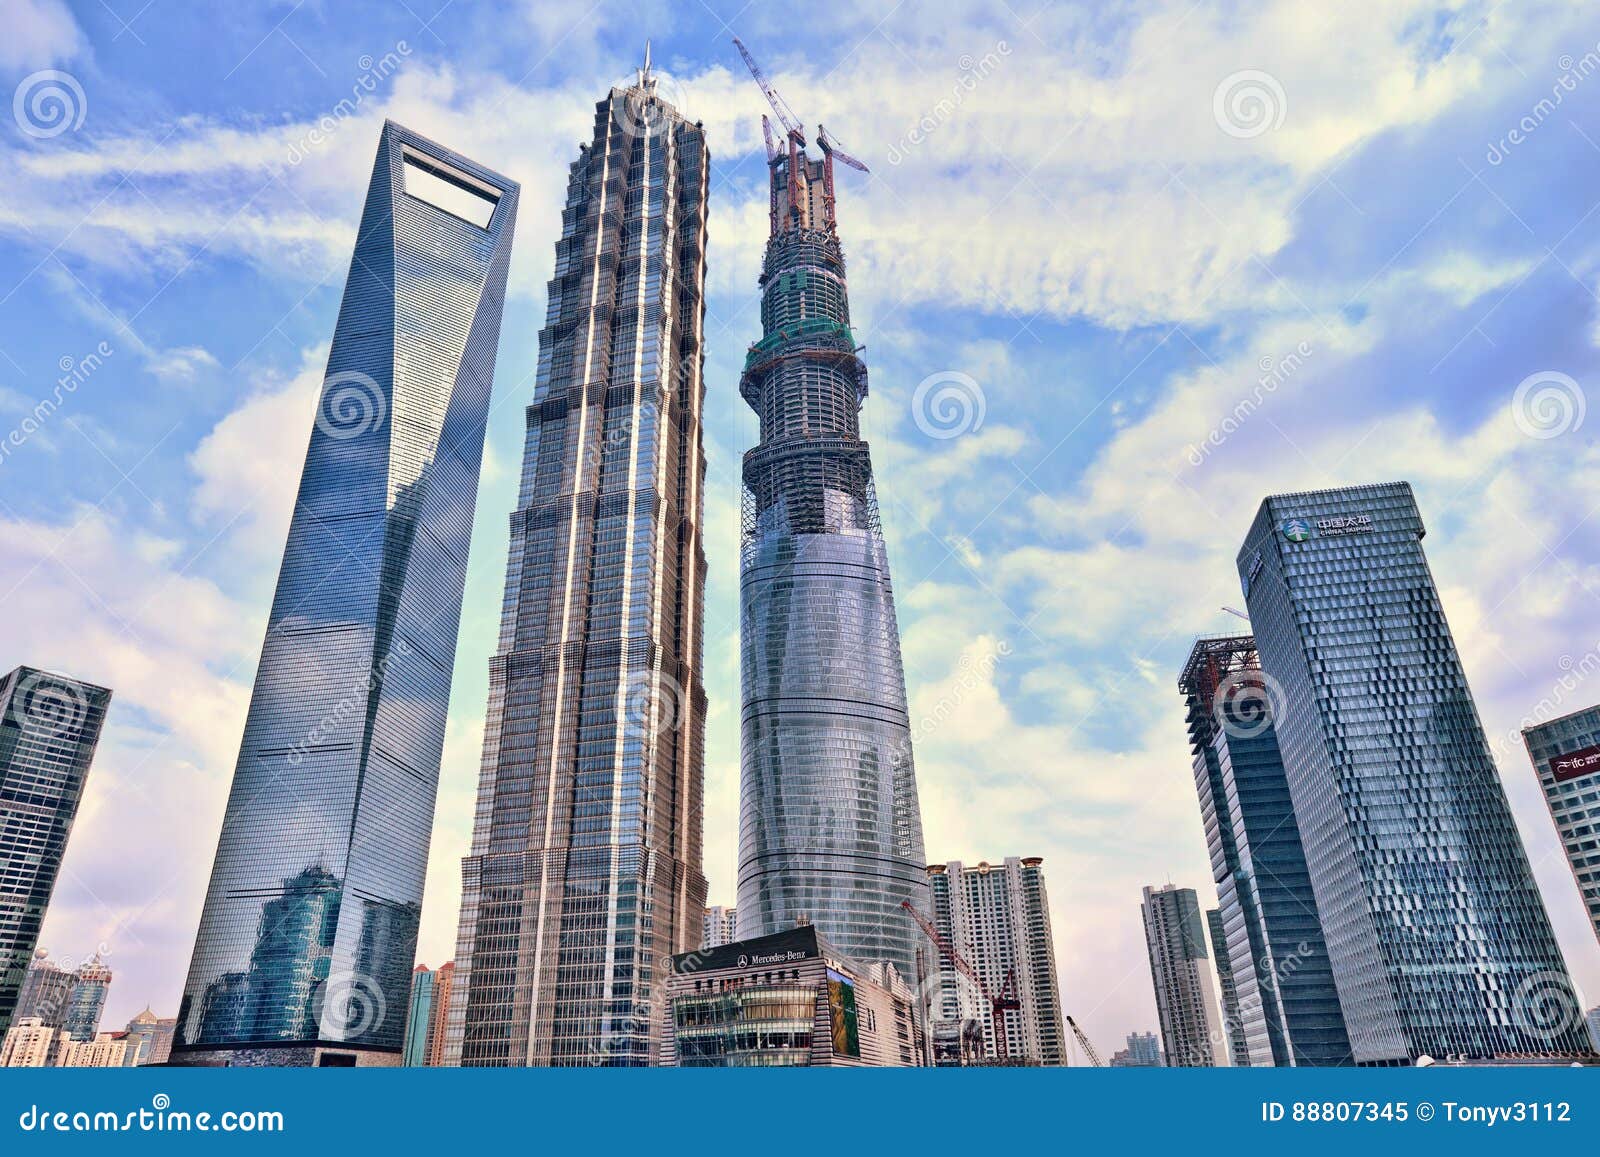 Tallest Skyscrapers of Shanhai at Lujizui Area, Editorial Image - Image corporate, commercial: 88807345